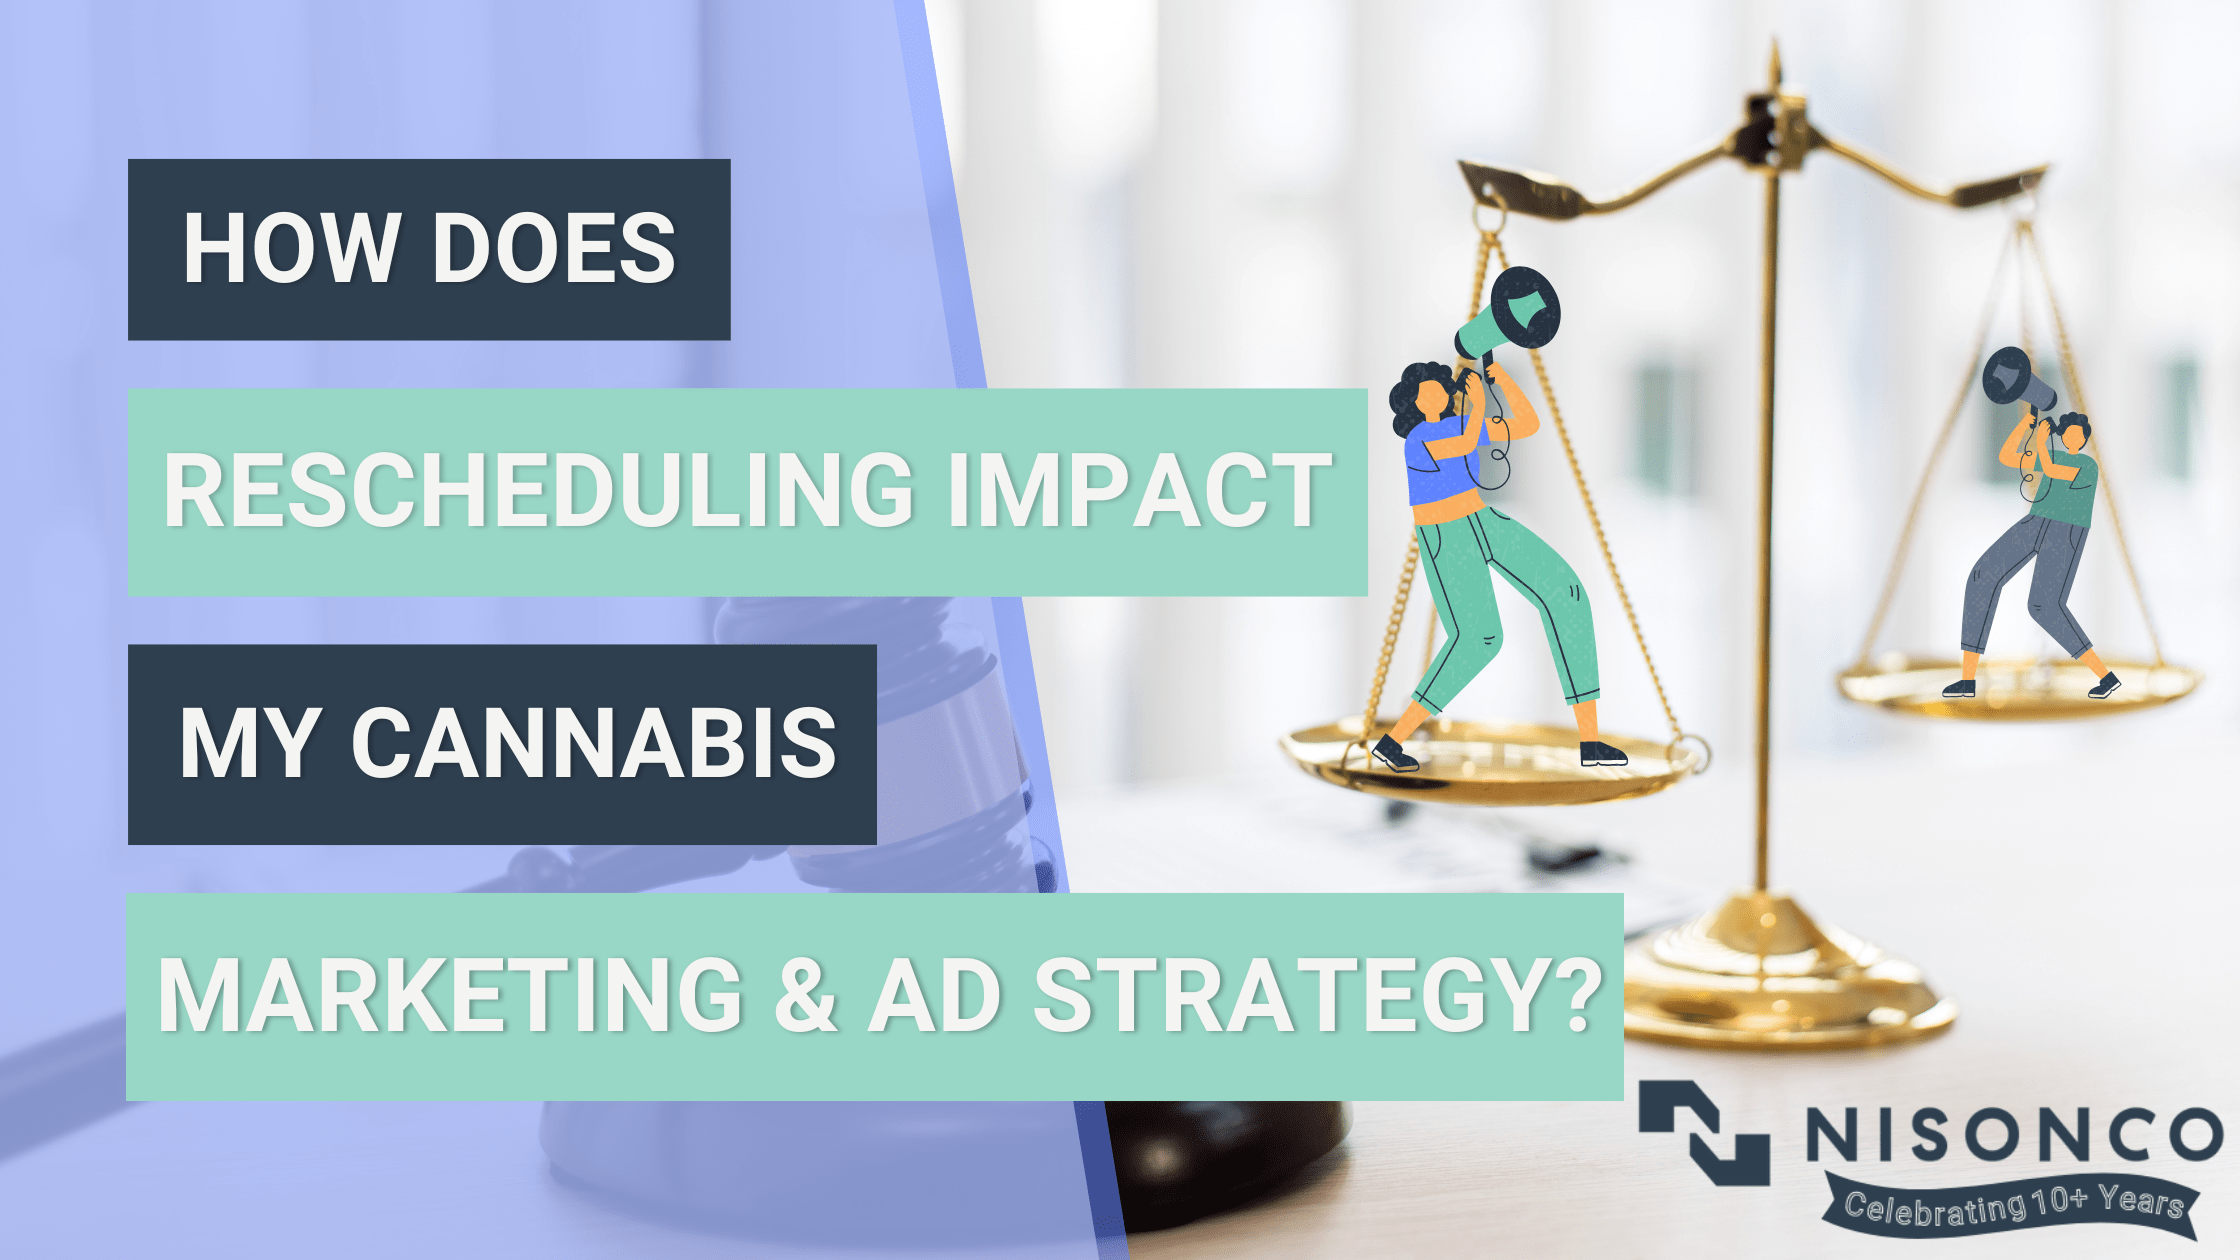 The text ' How Does Rescheduling Impact My Cannabis Marketing and Ad Strategy?' is to the left of two illustrated figures speaking into megaphones balancing on legal justice scales.